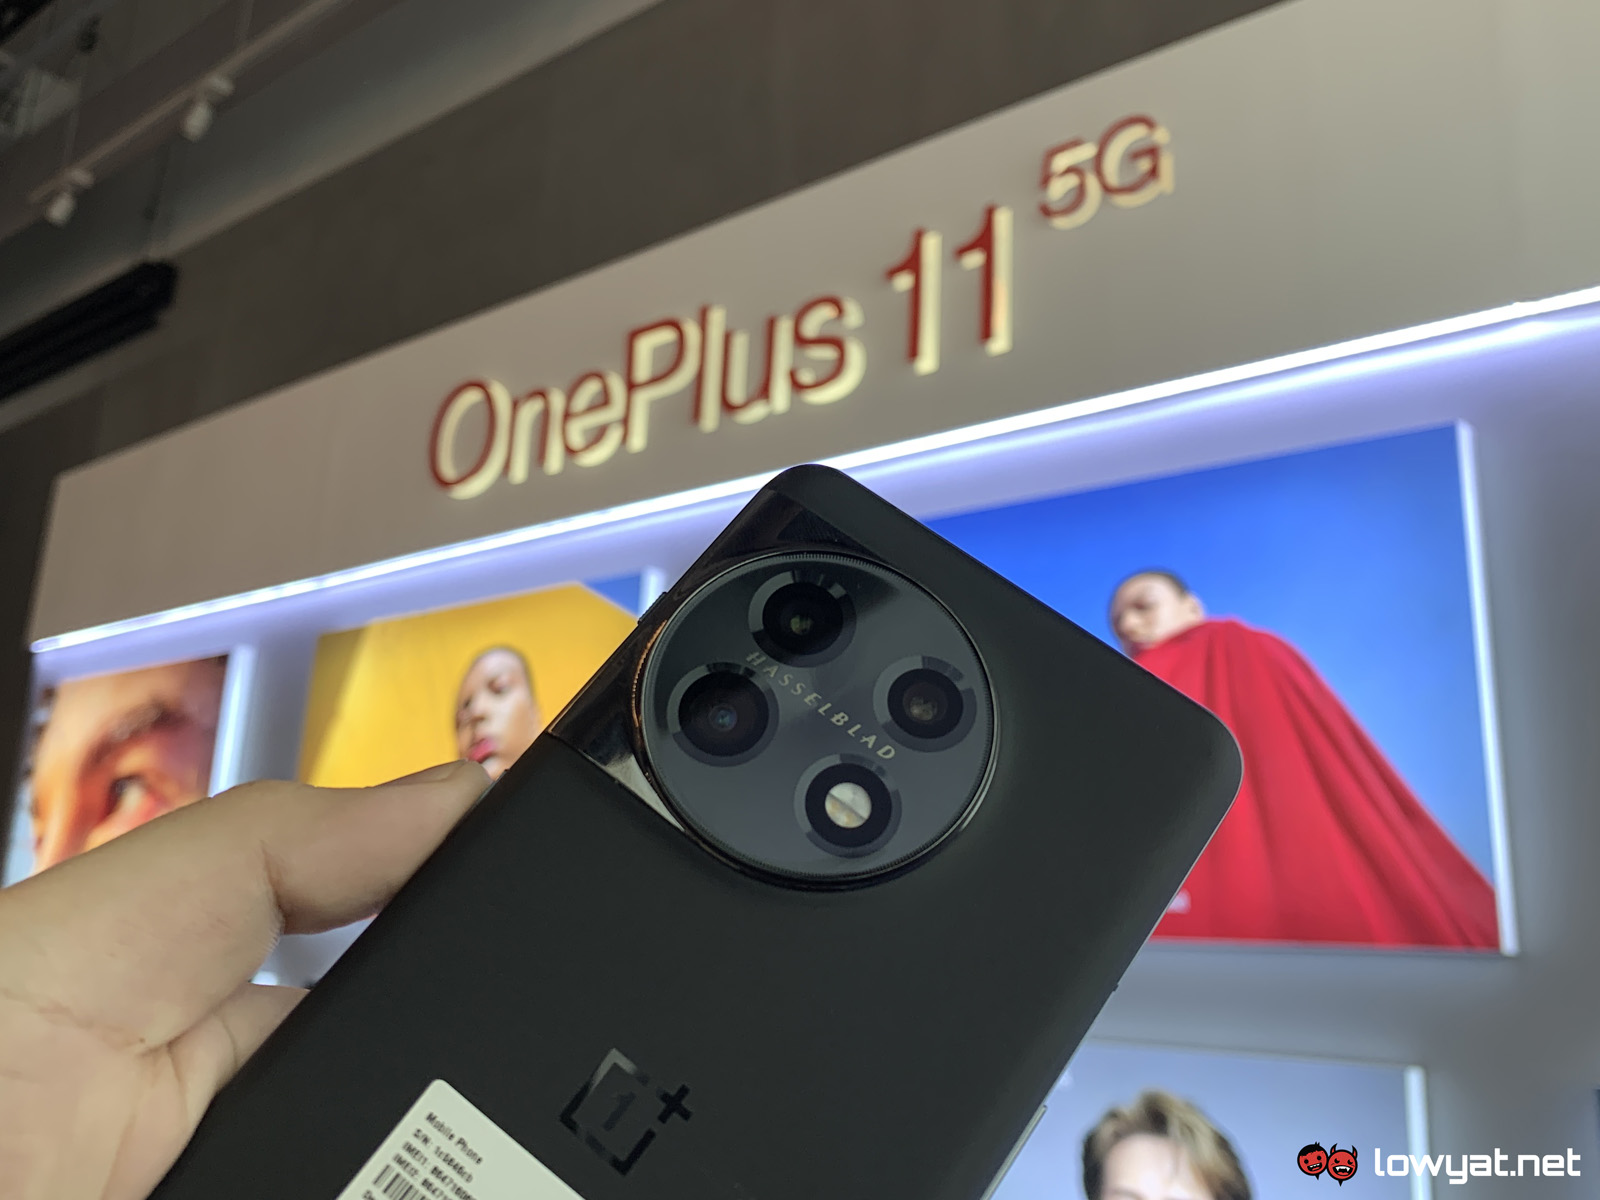 OnePlus 11 launches in China, 1 month ahead of global release